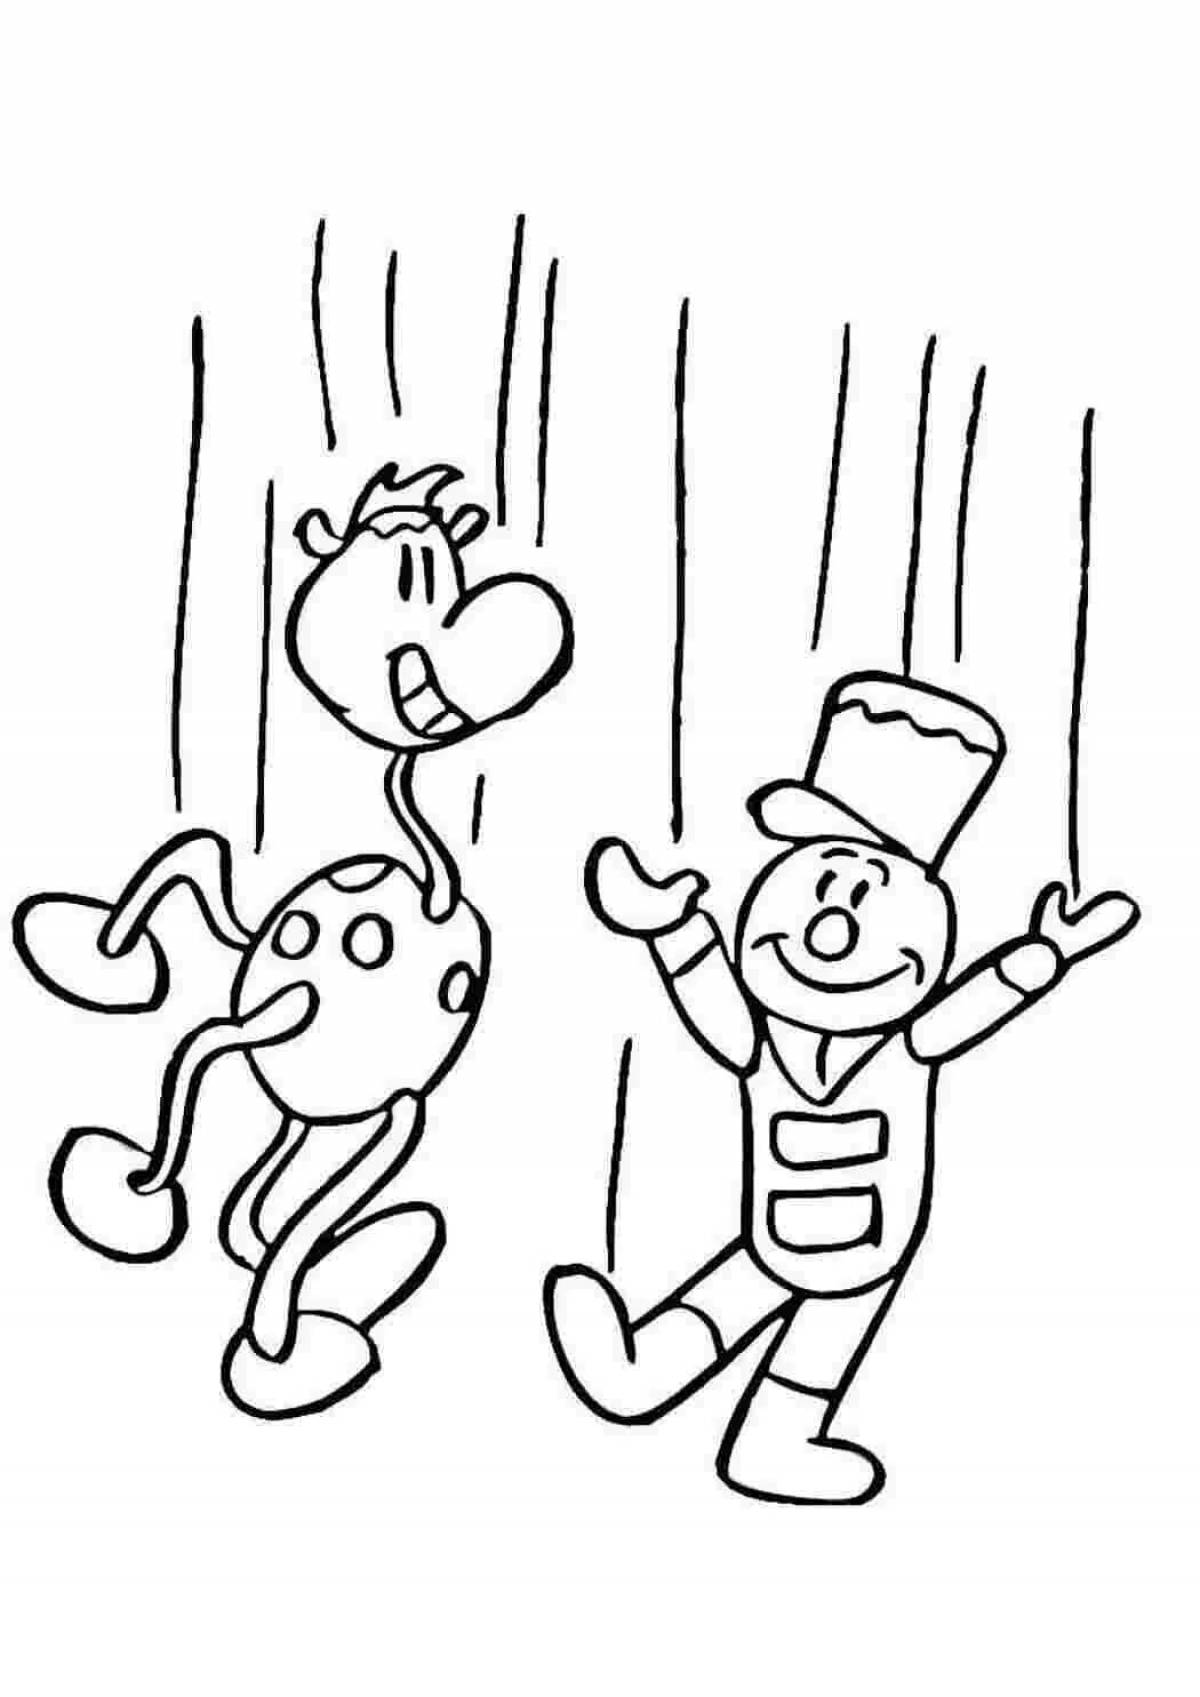 Coloring page deceptive puppet theater